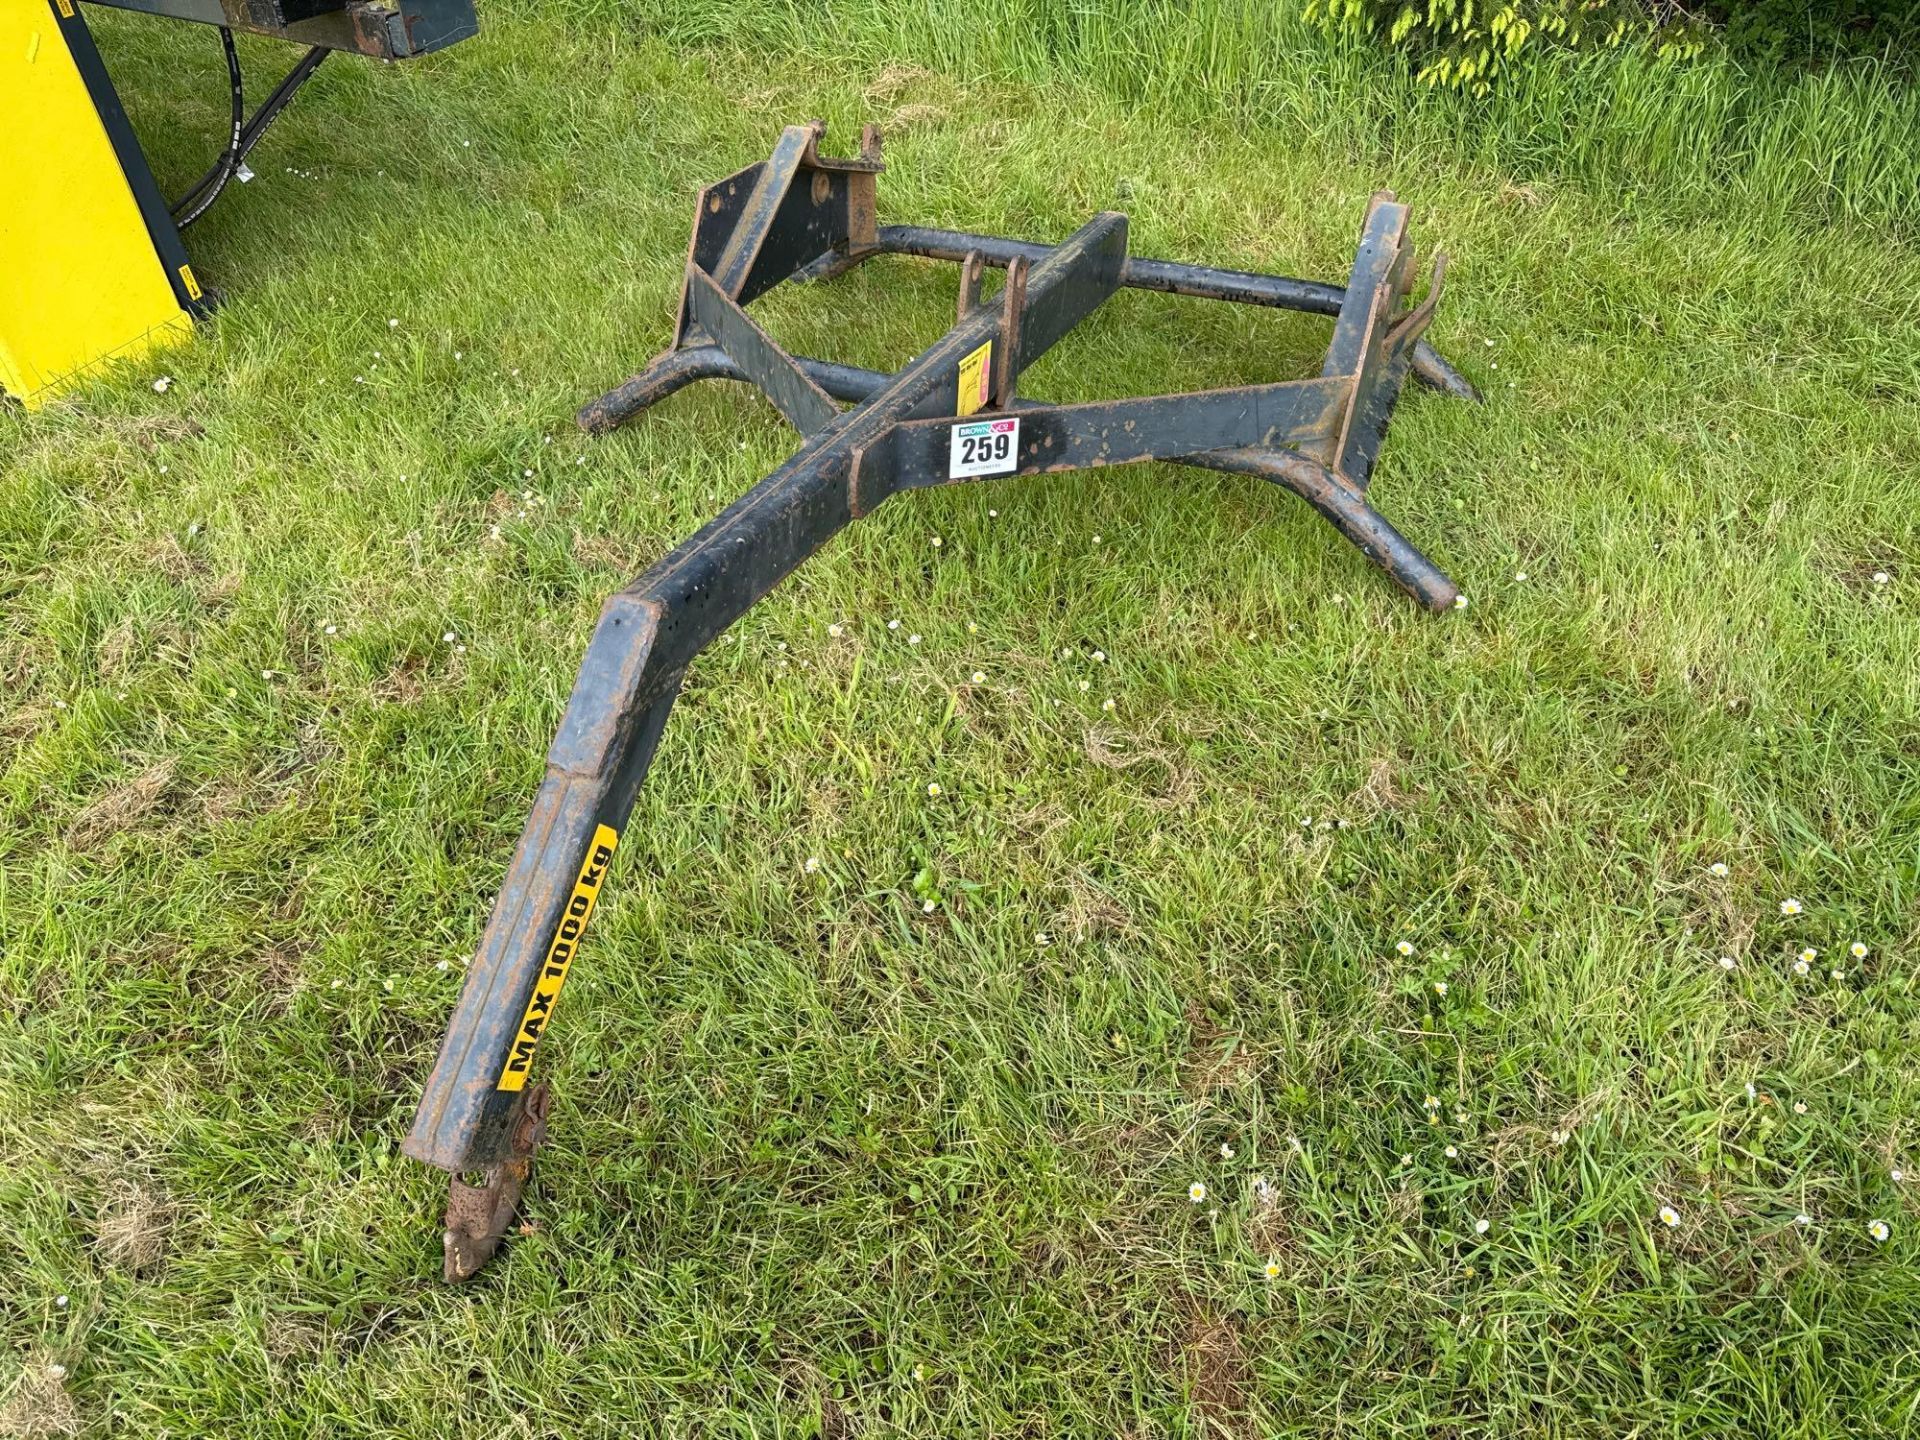 Lawrence Edwards bag lifter with Euro8 brackets. NO VAT